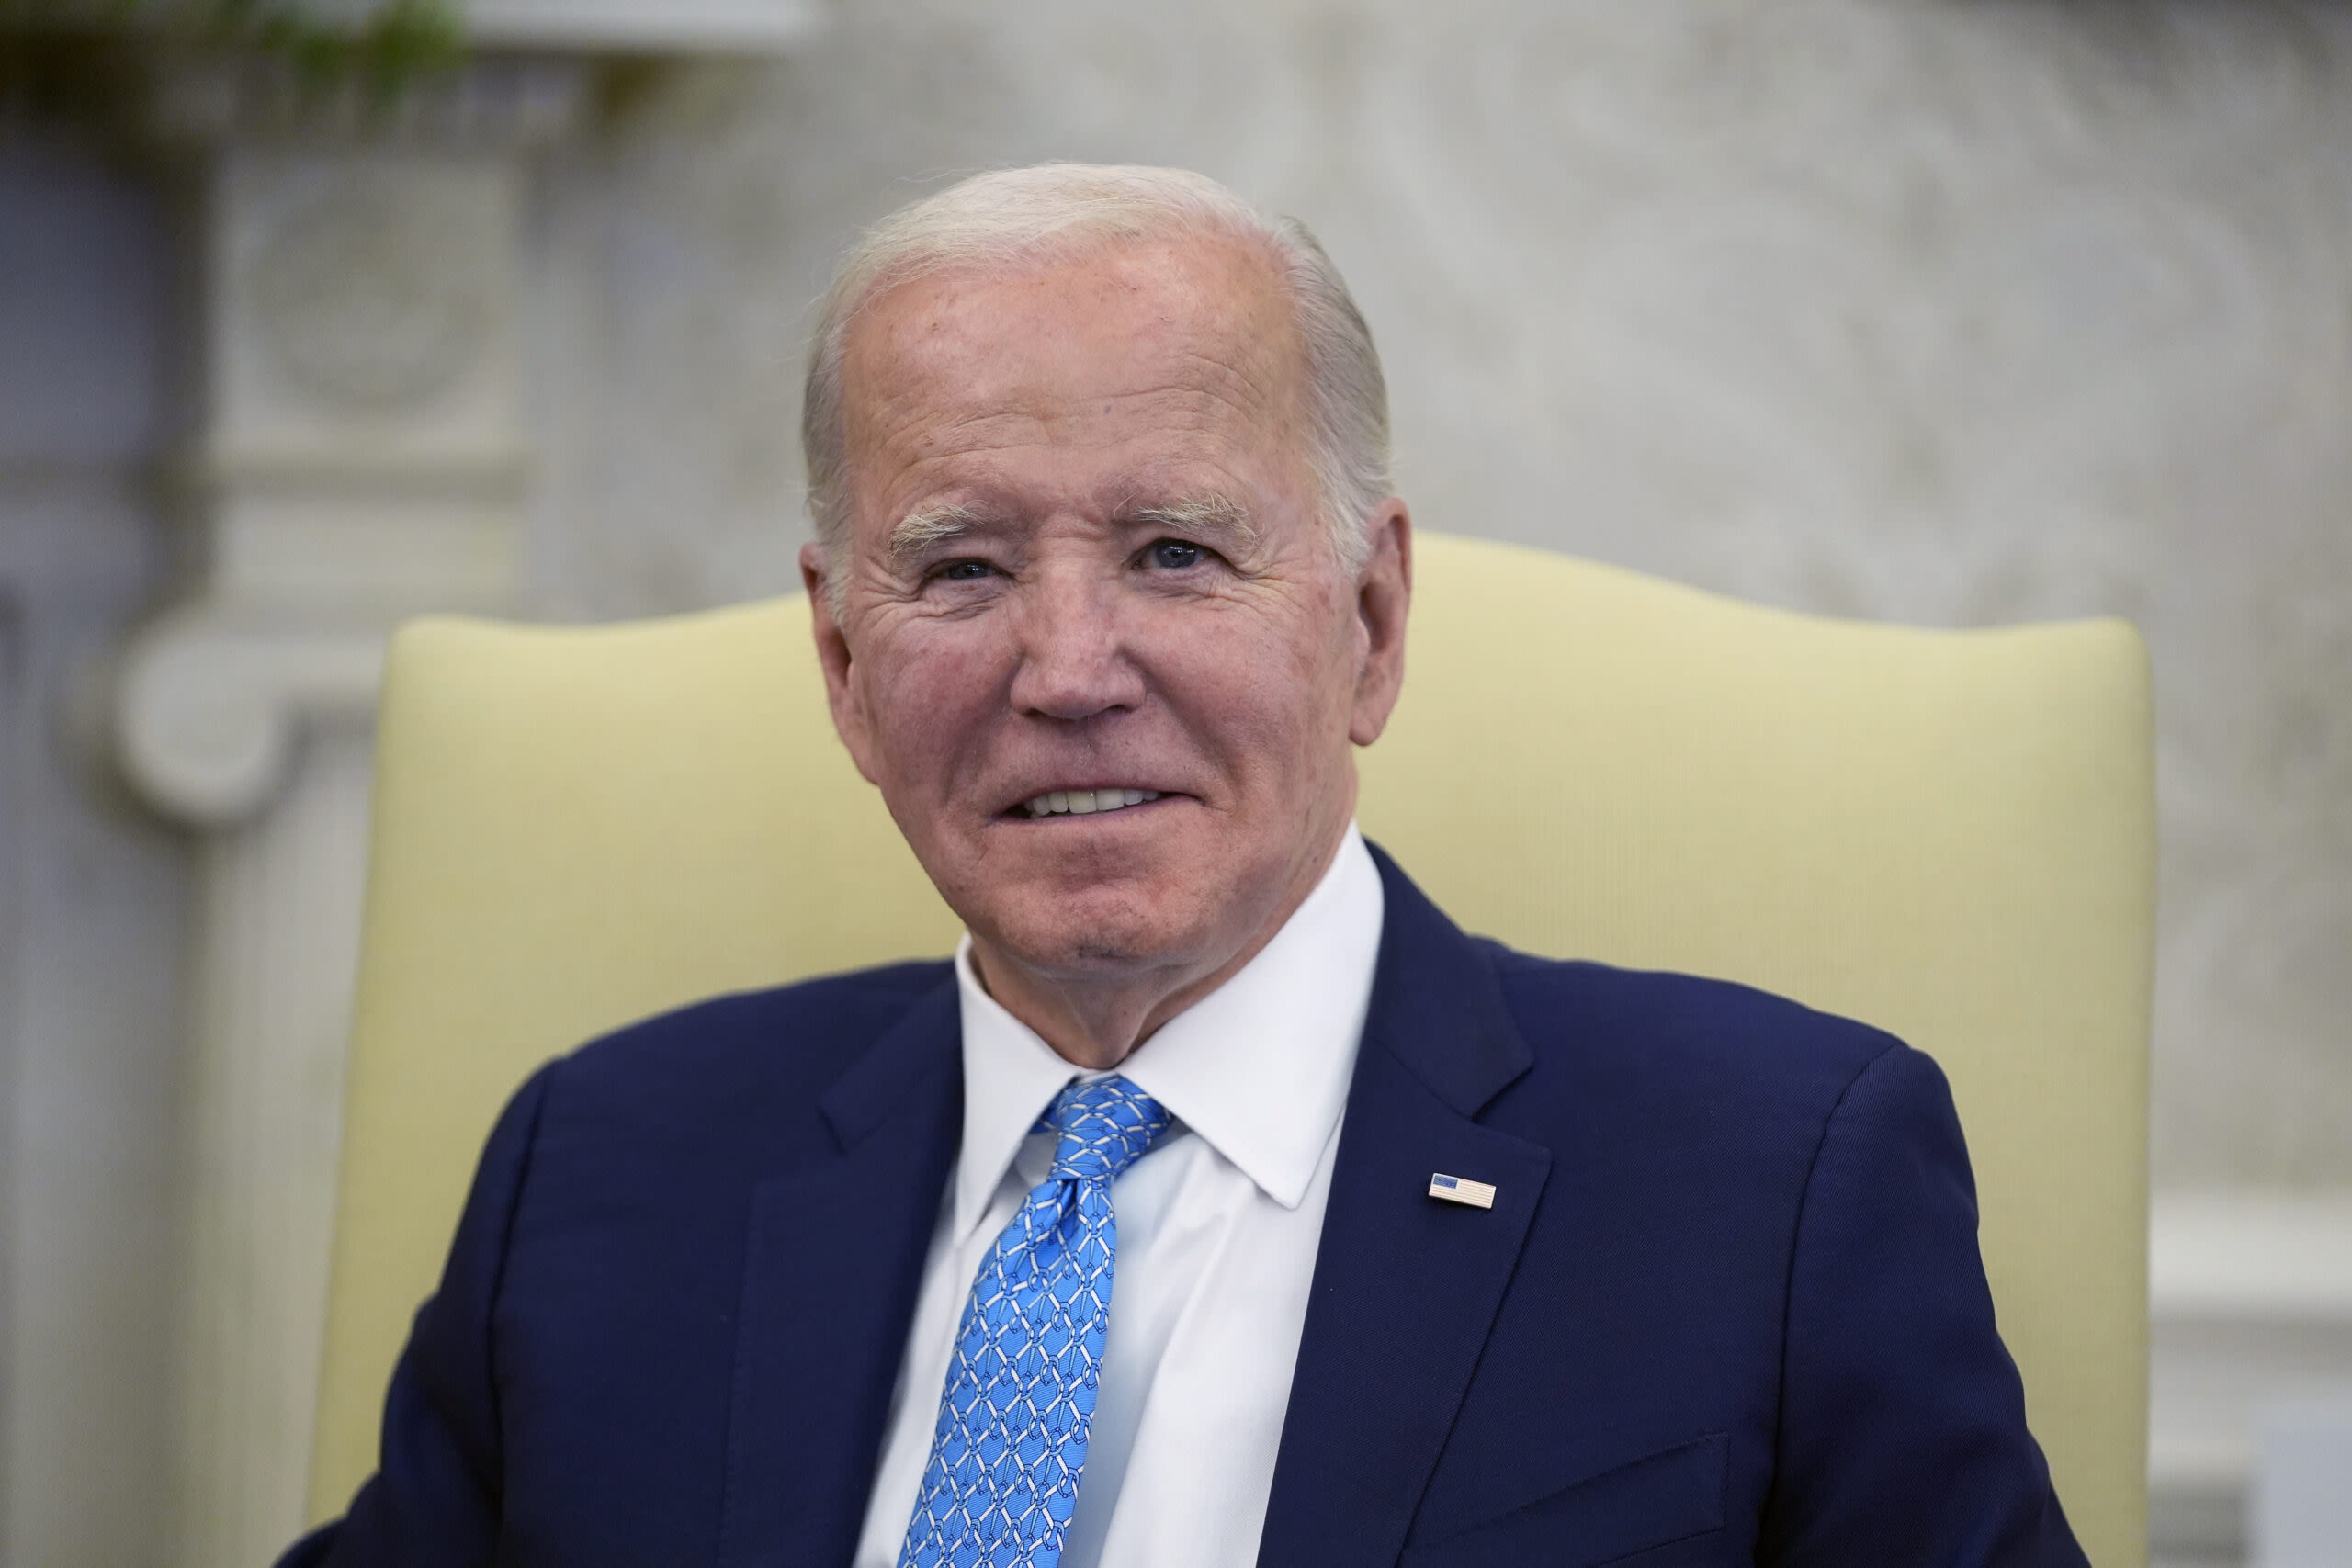 ‘This is Horrible News’: Democratic Governor Slams Biden On Economics, Offers Own Plan to Crush Inflation